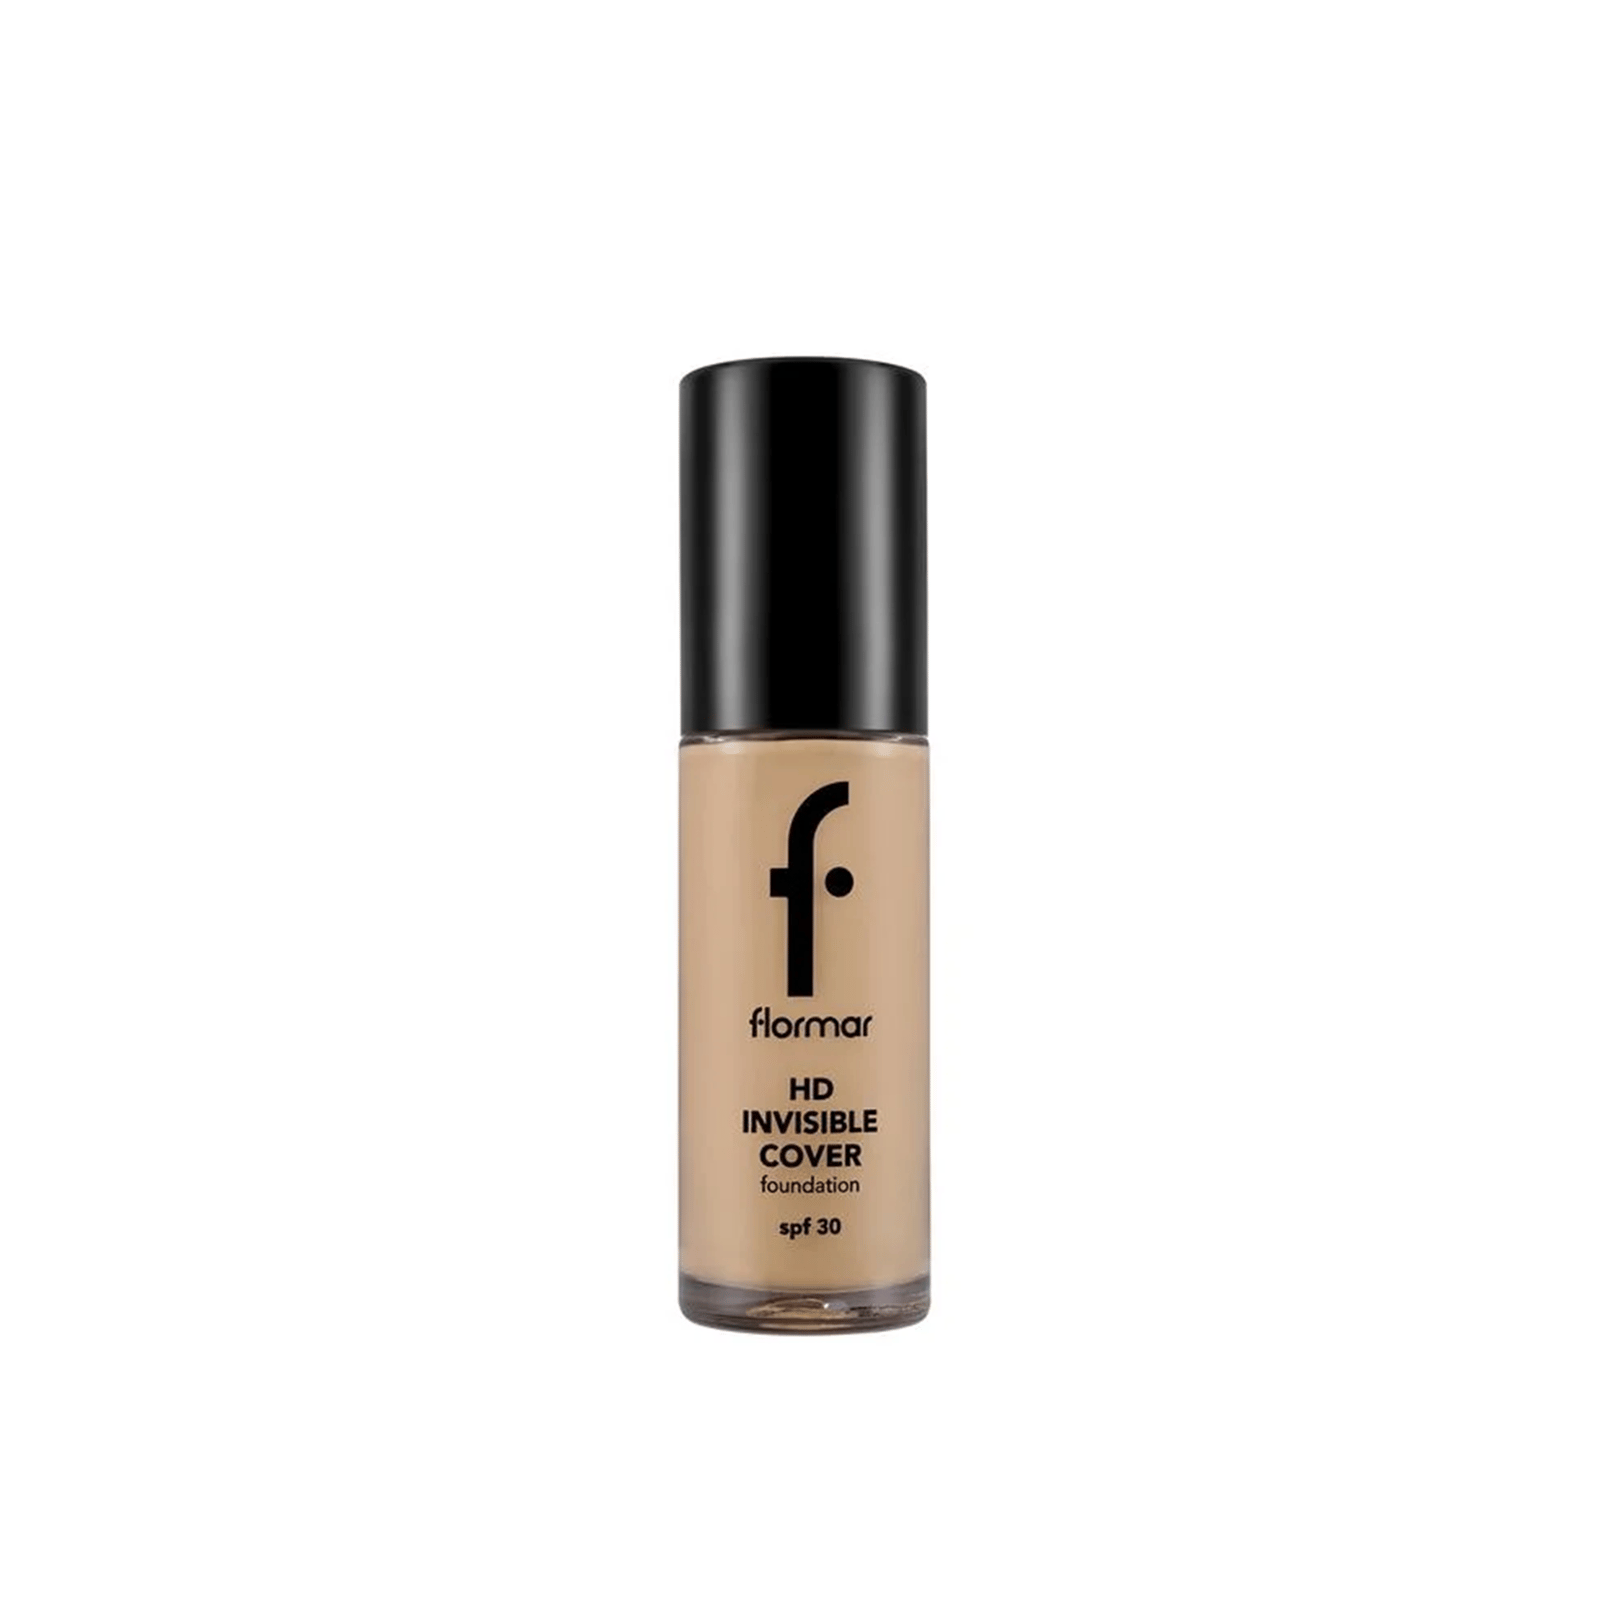 Flormar Invisible Cover HD Foundation SPF30 90 Golden Neutral 30ml (1.01floz)